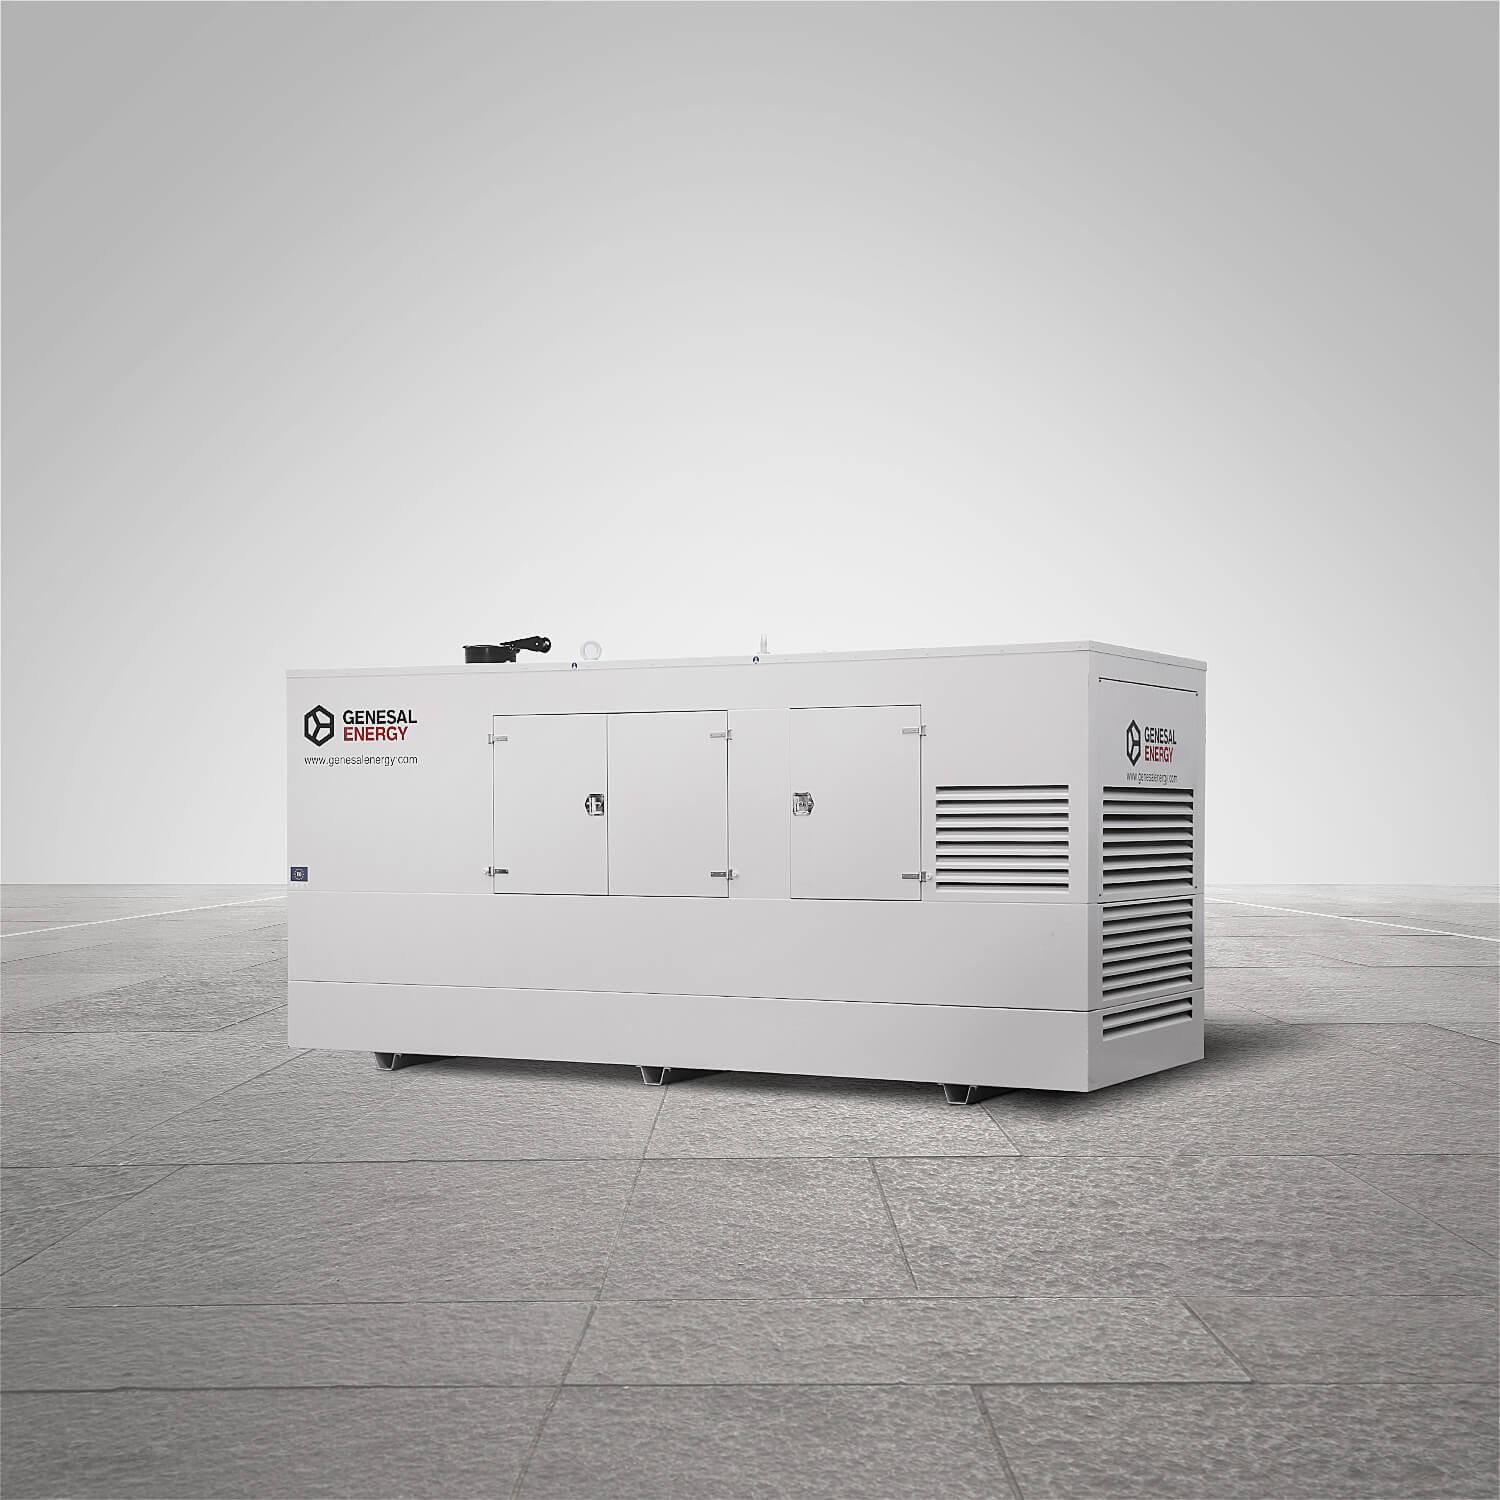 Dual frequency and dual voltage gensets for an international construction company